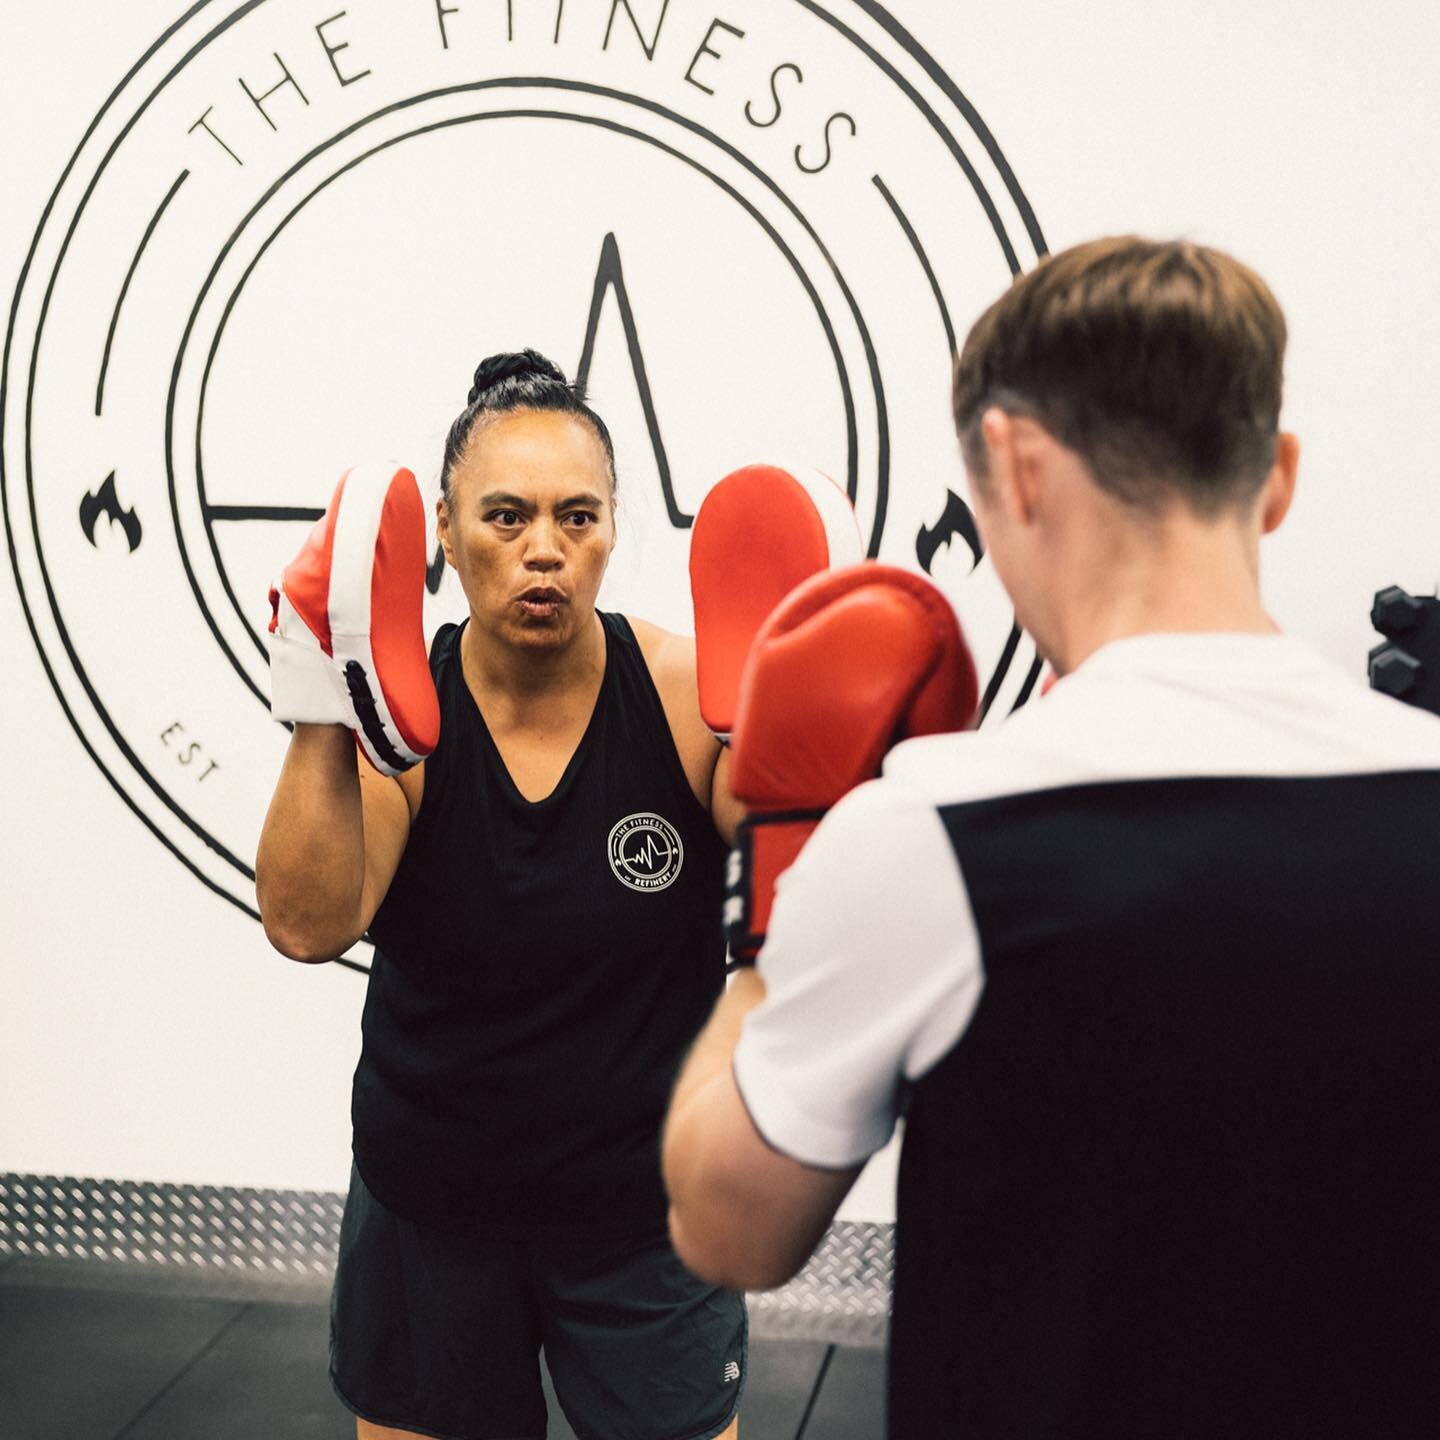 Have you tried our boxing classes yet? 🥊 

Boxing is one of the best full-body workouts, helping you to build strength, coordination, and speed 💪🏼😌

At The Fitness Refinery, our coaches will teach you proper boxing technique, and combinations. Wh